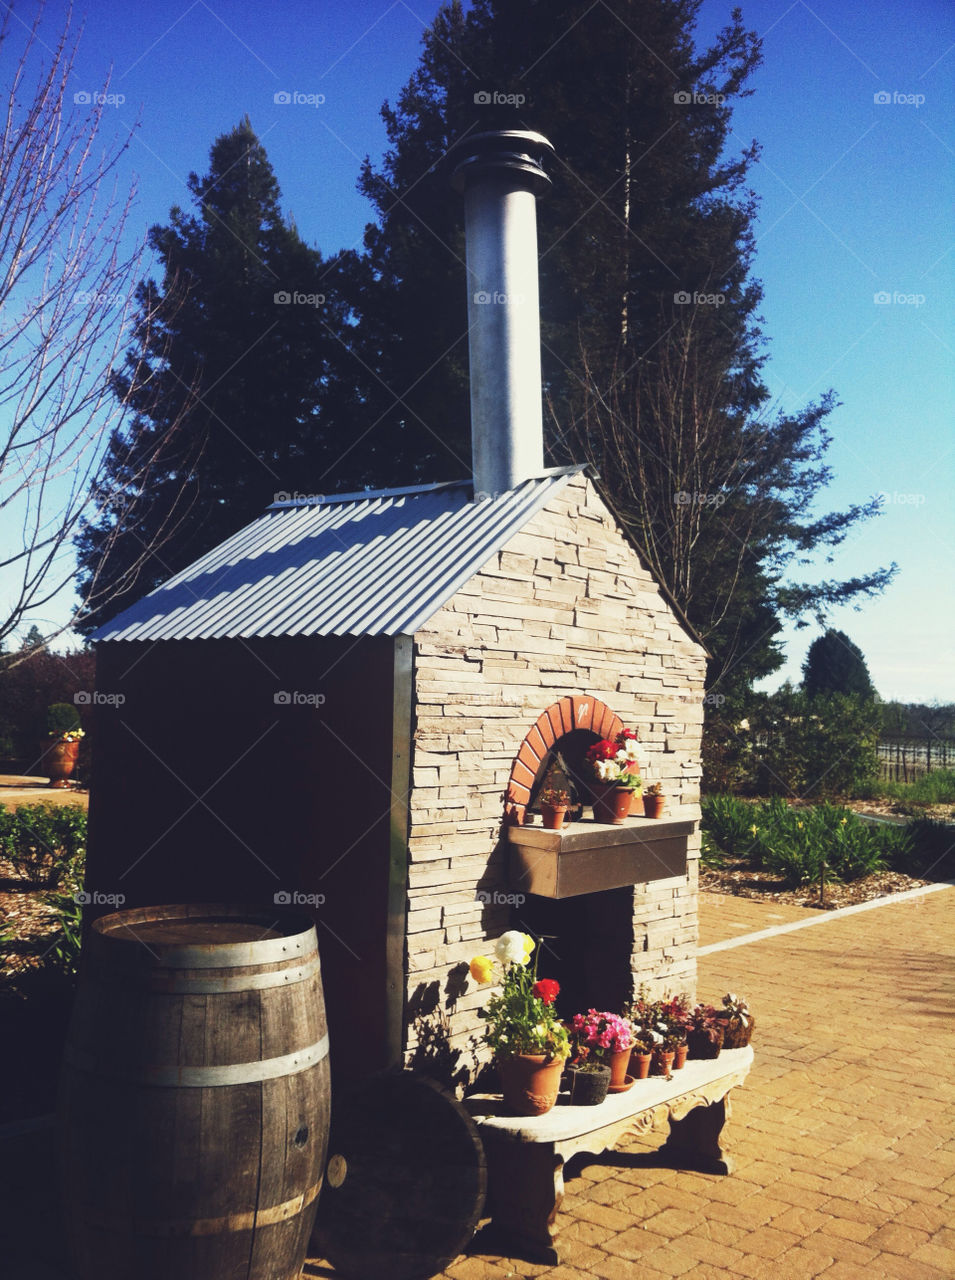 An outdoor fireplace at a winery.